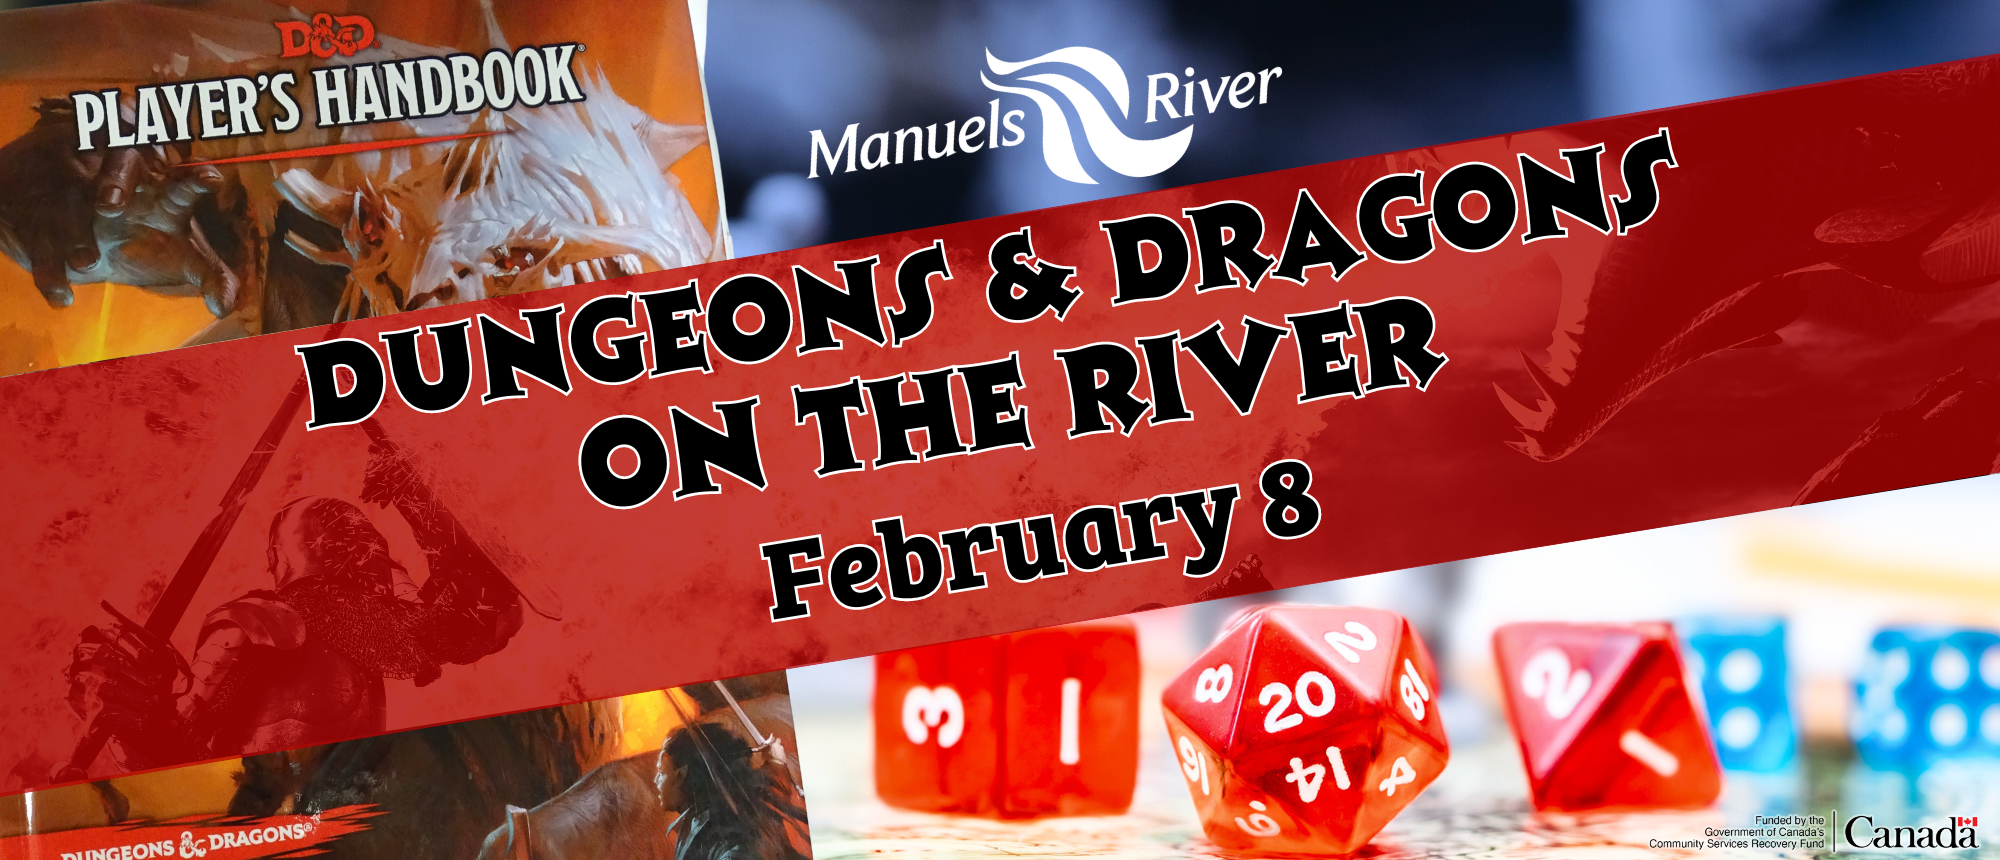 Dungeons & Dragons On The River